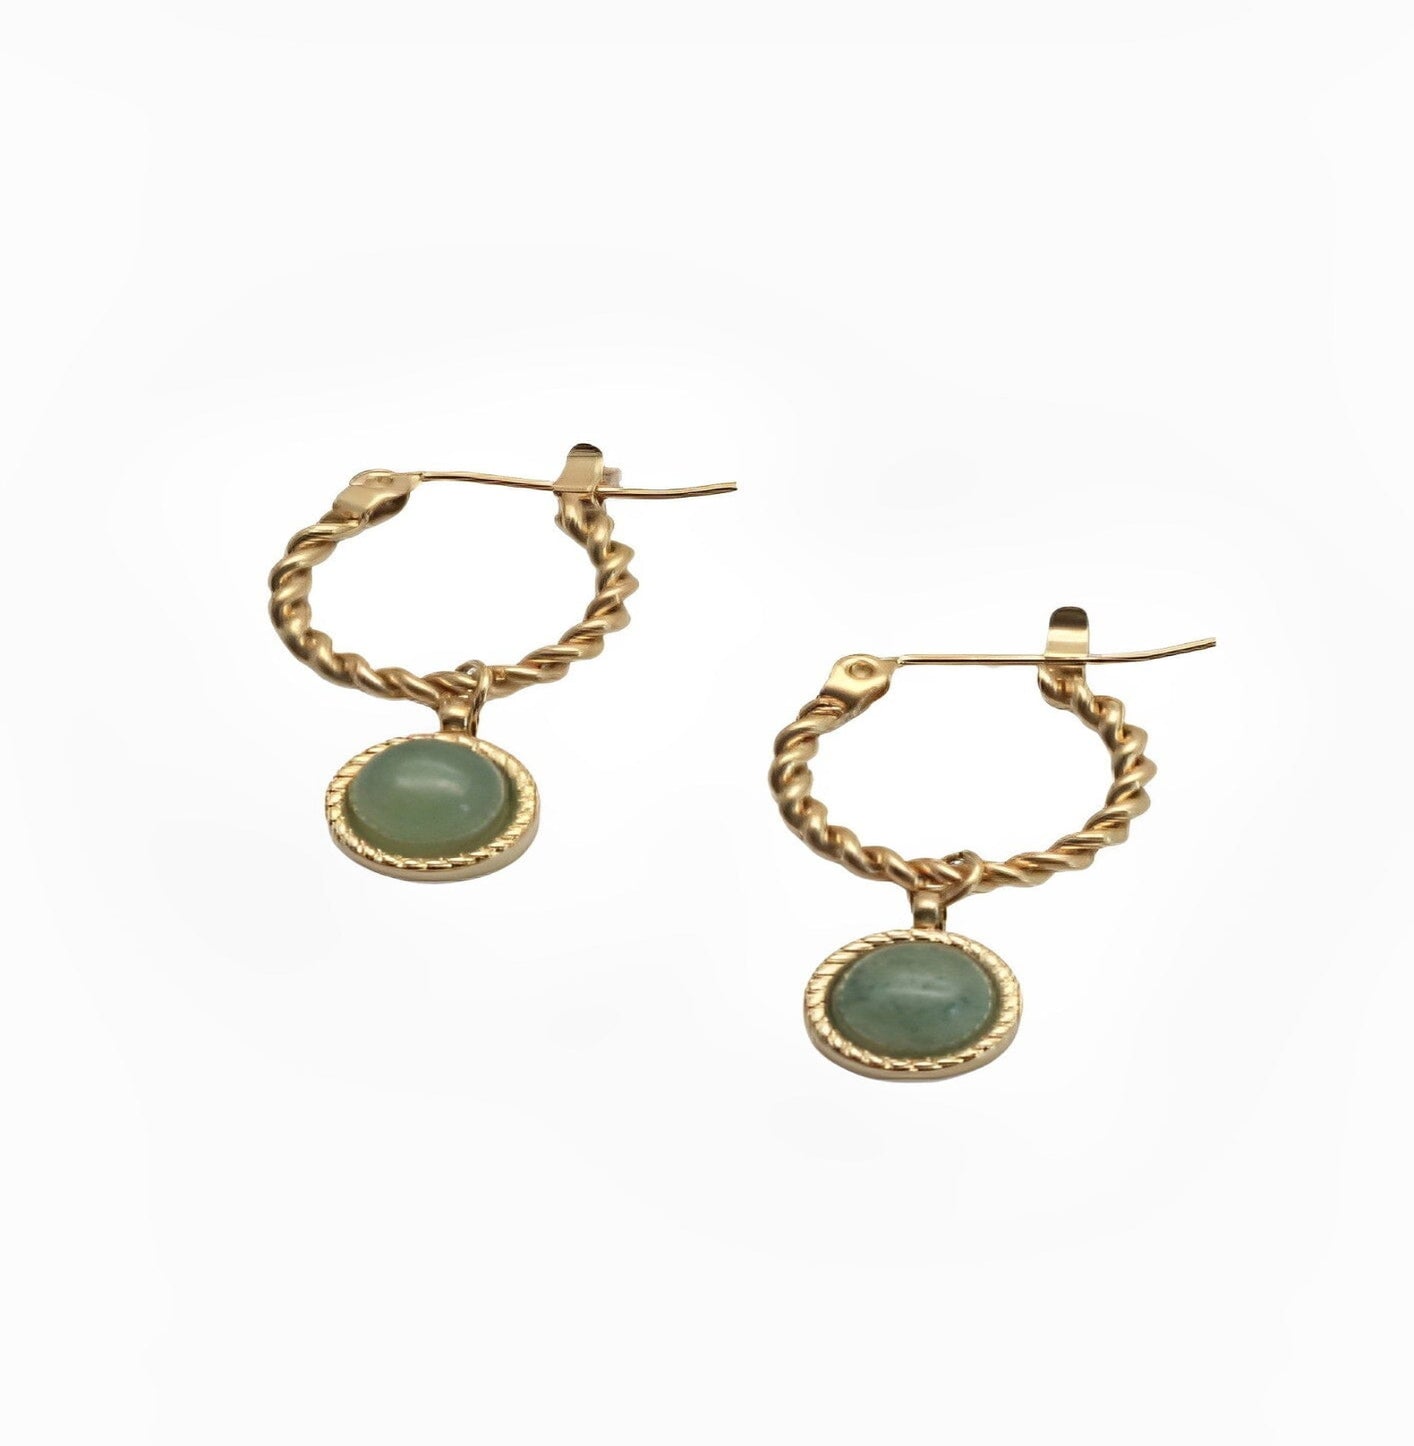 GENUINE GREEN STONE EARRINGS earing Yubama Jewelry Online Store - The Elegant Designs of Gold and Silver ! 